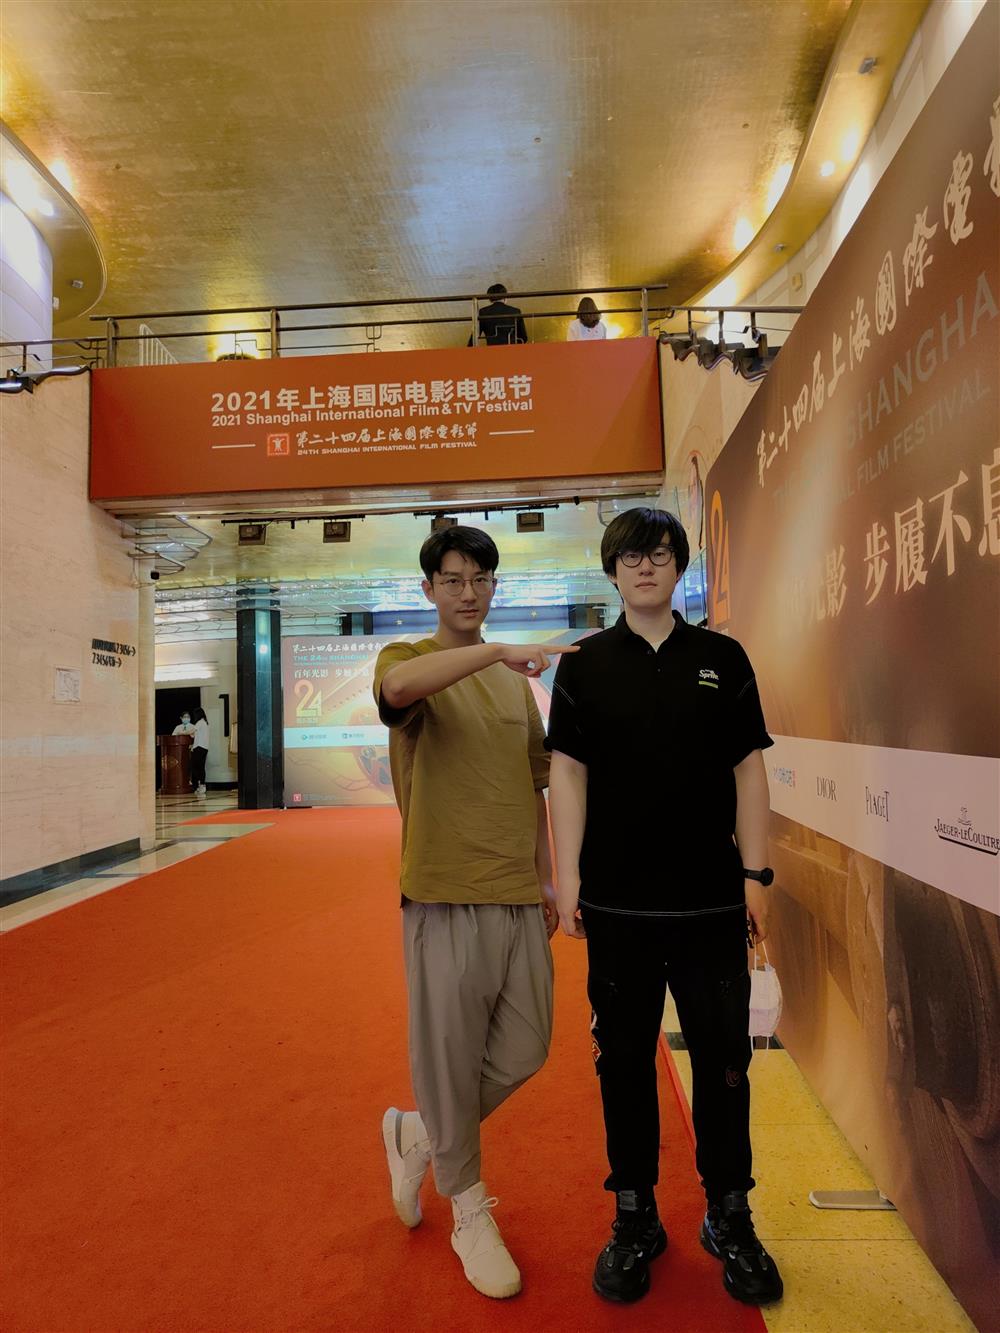 It is our ceremony, taking a group photo at Guangming Cinema during the Shanghai Film Festival every year